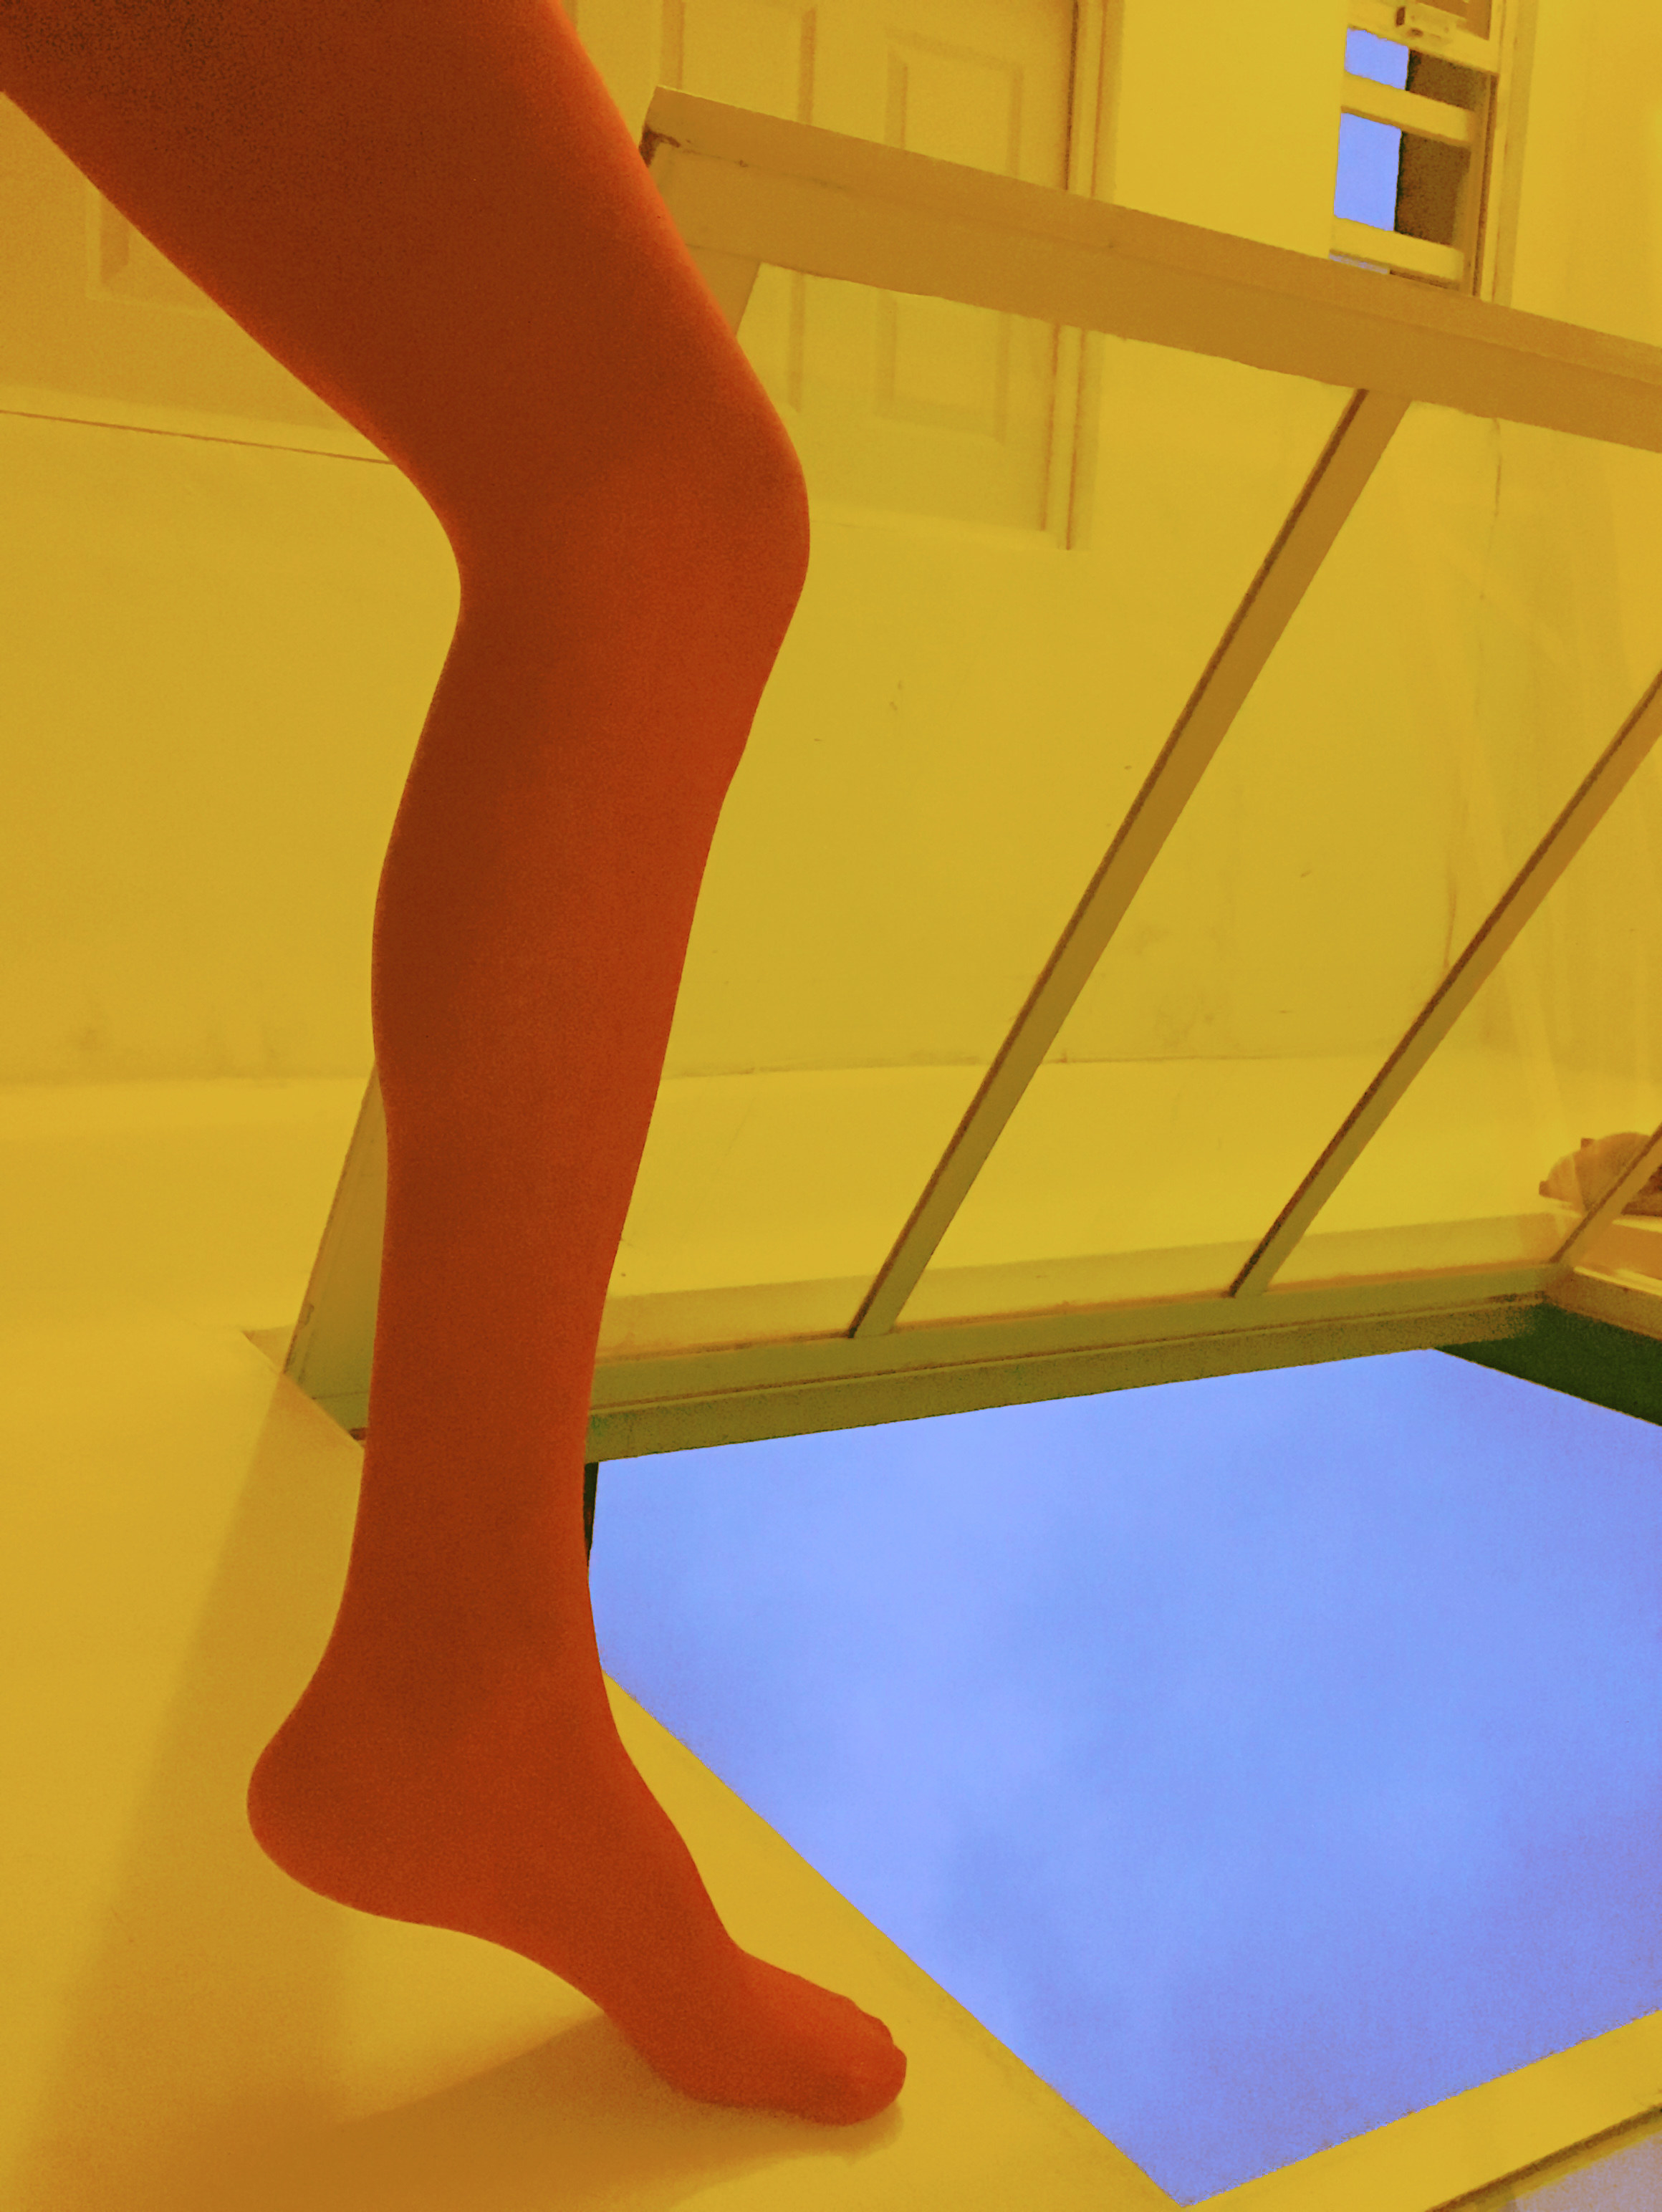 An orange leg next to a yellow wall and blue skylight